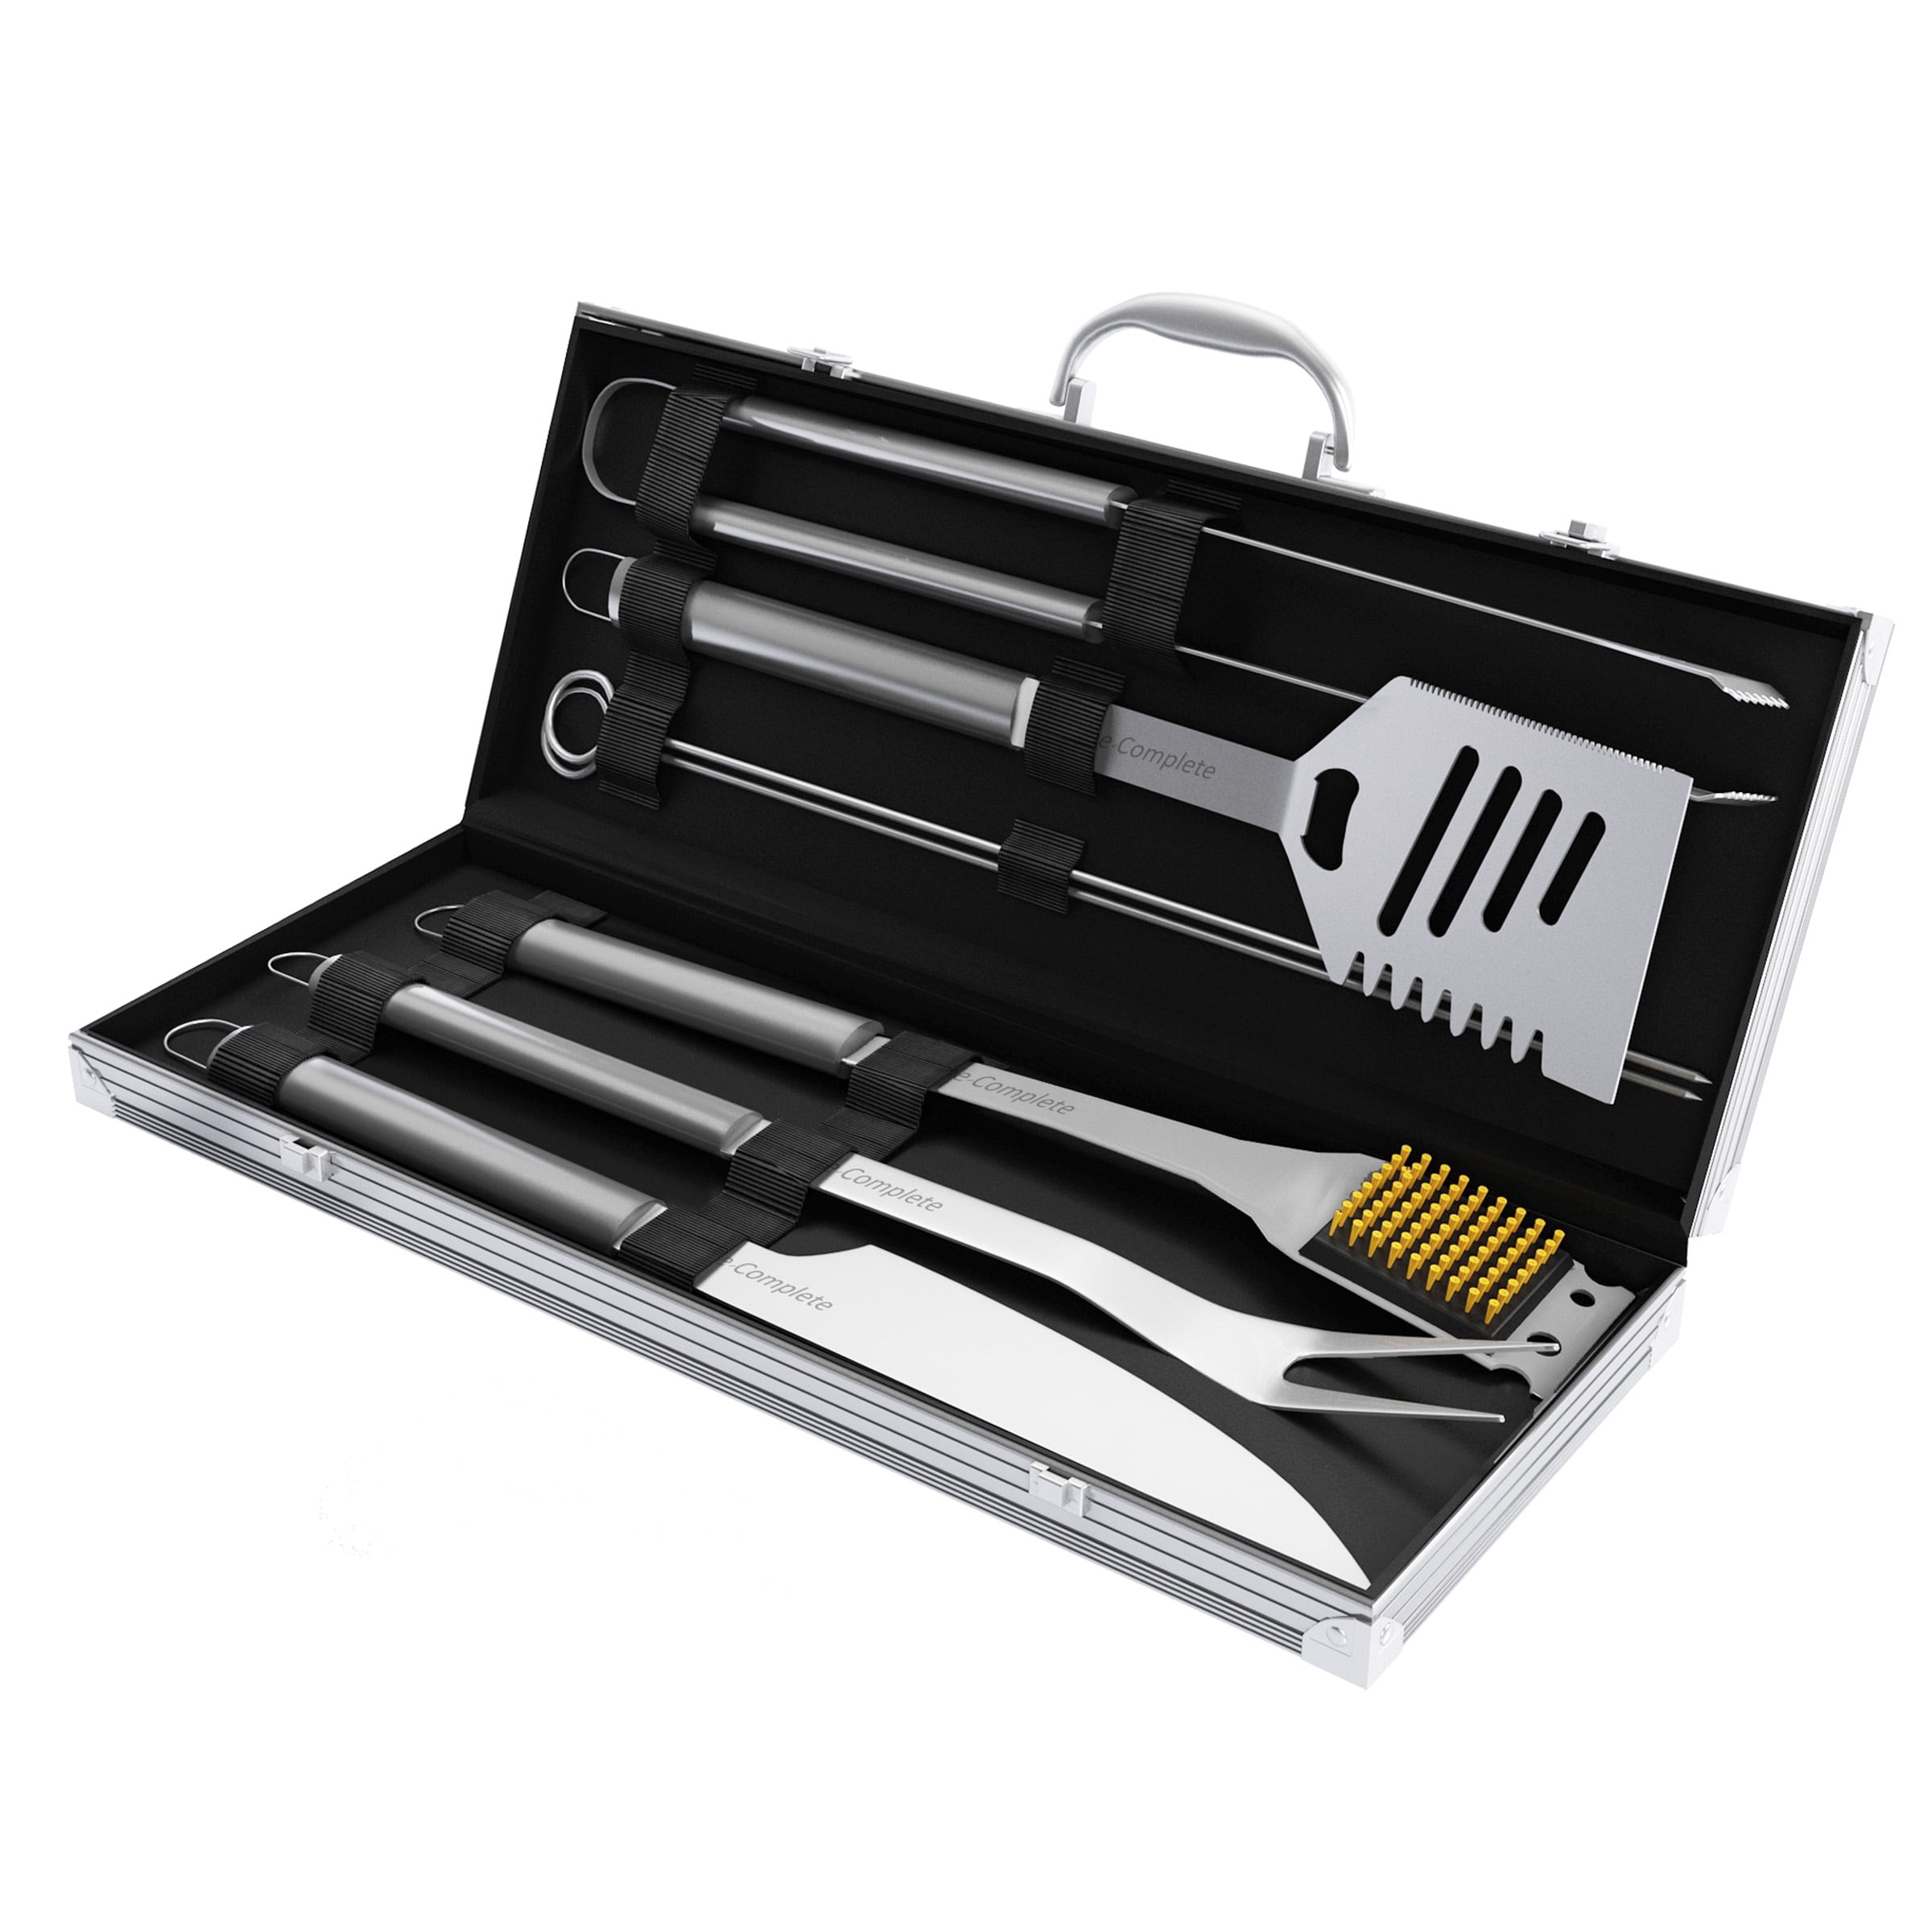 BBQ-AID Pro Grill Set - 6 Piece Bundle - Featuring Grill Brush, Replacement  Heads, Spatula, Tongs, and Fork